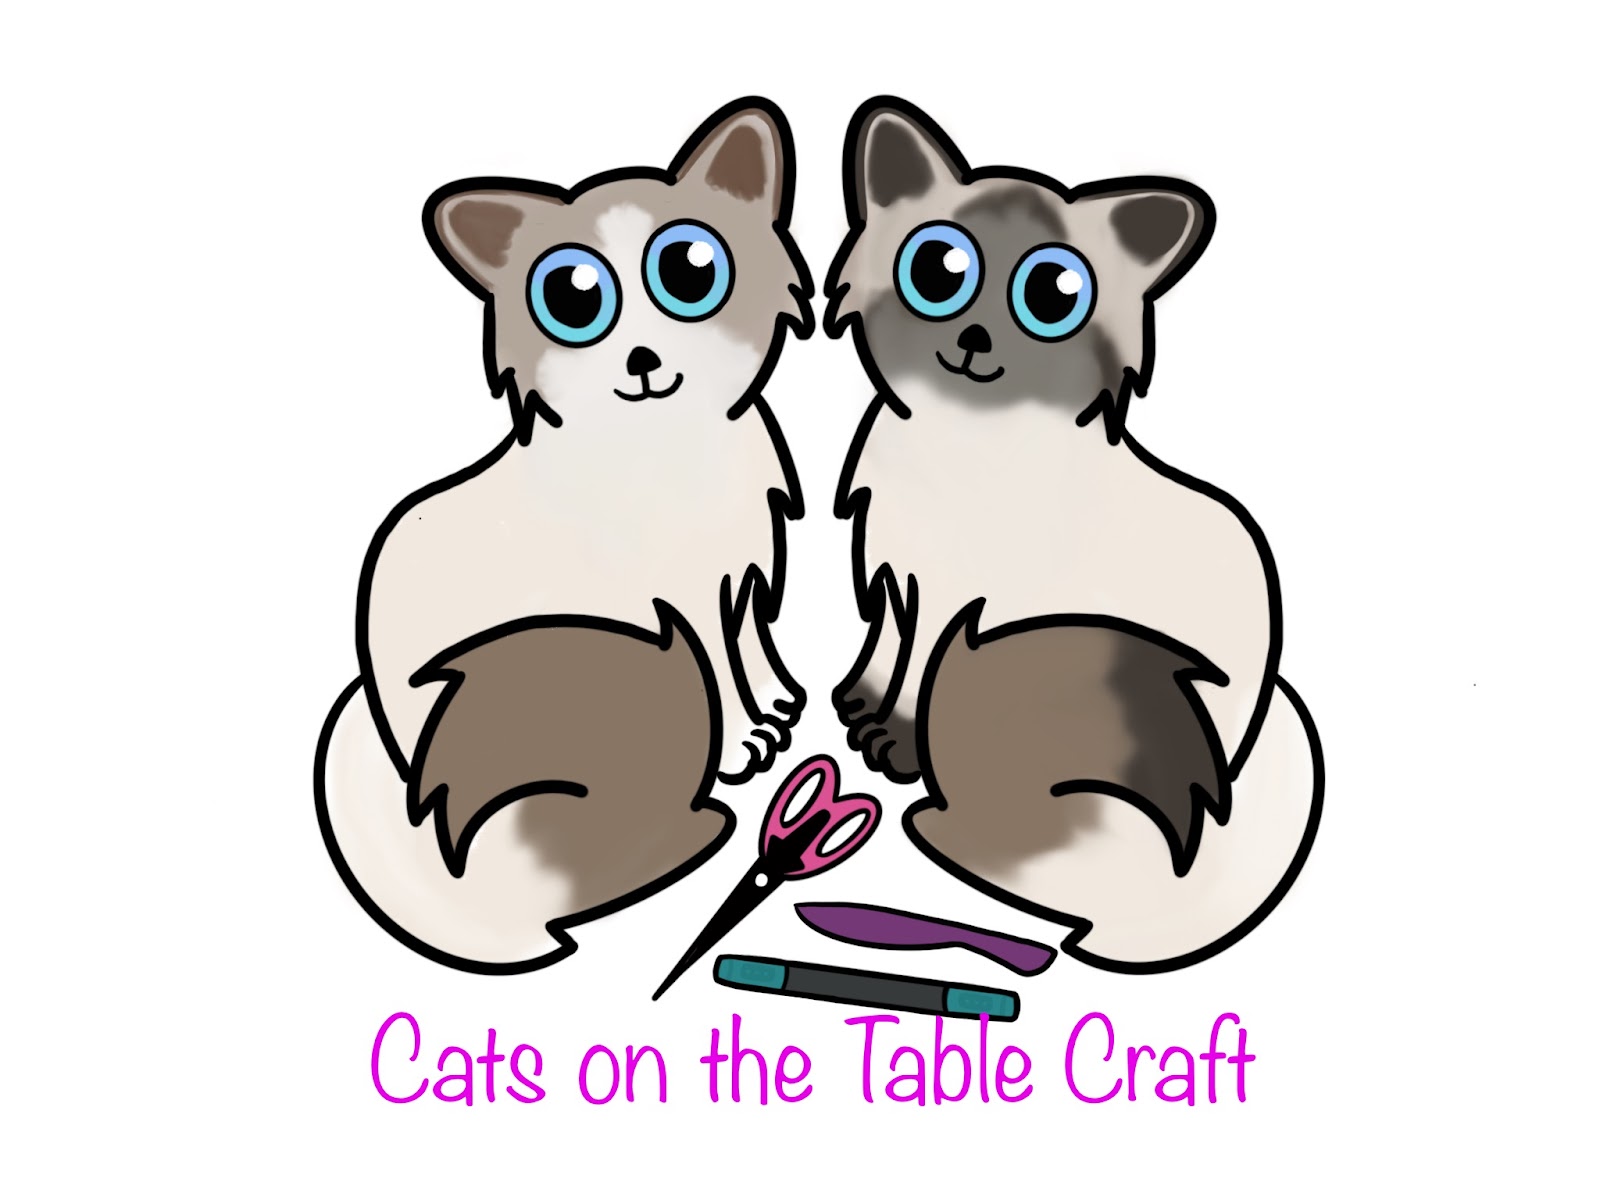 Cats on the Table Craft